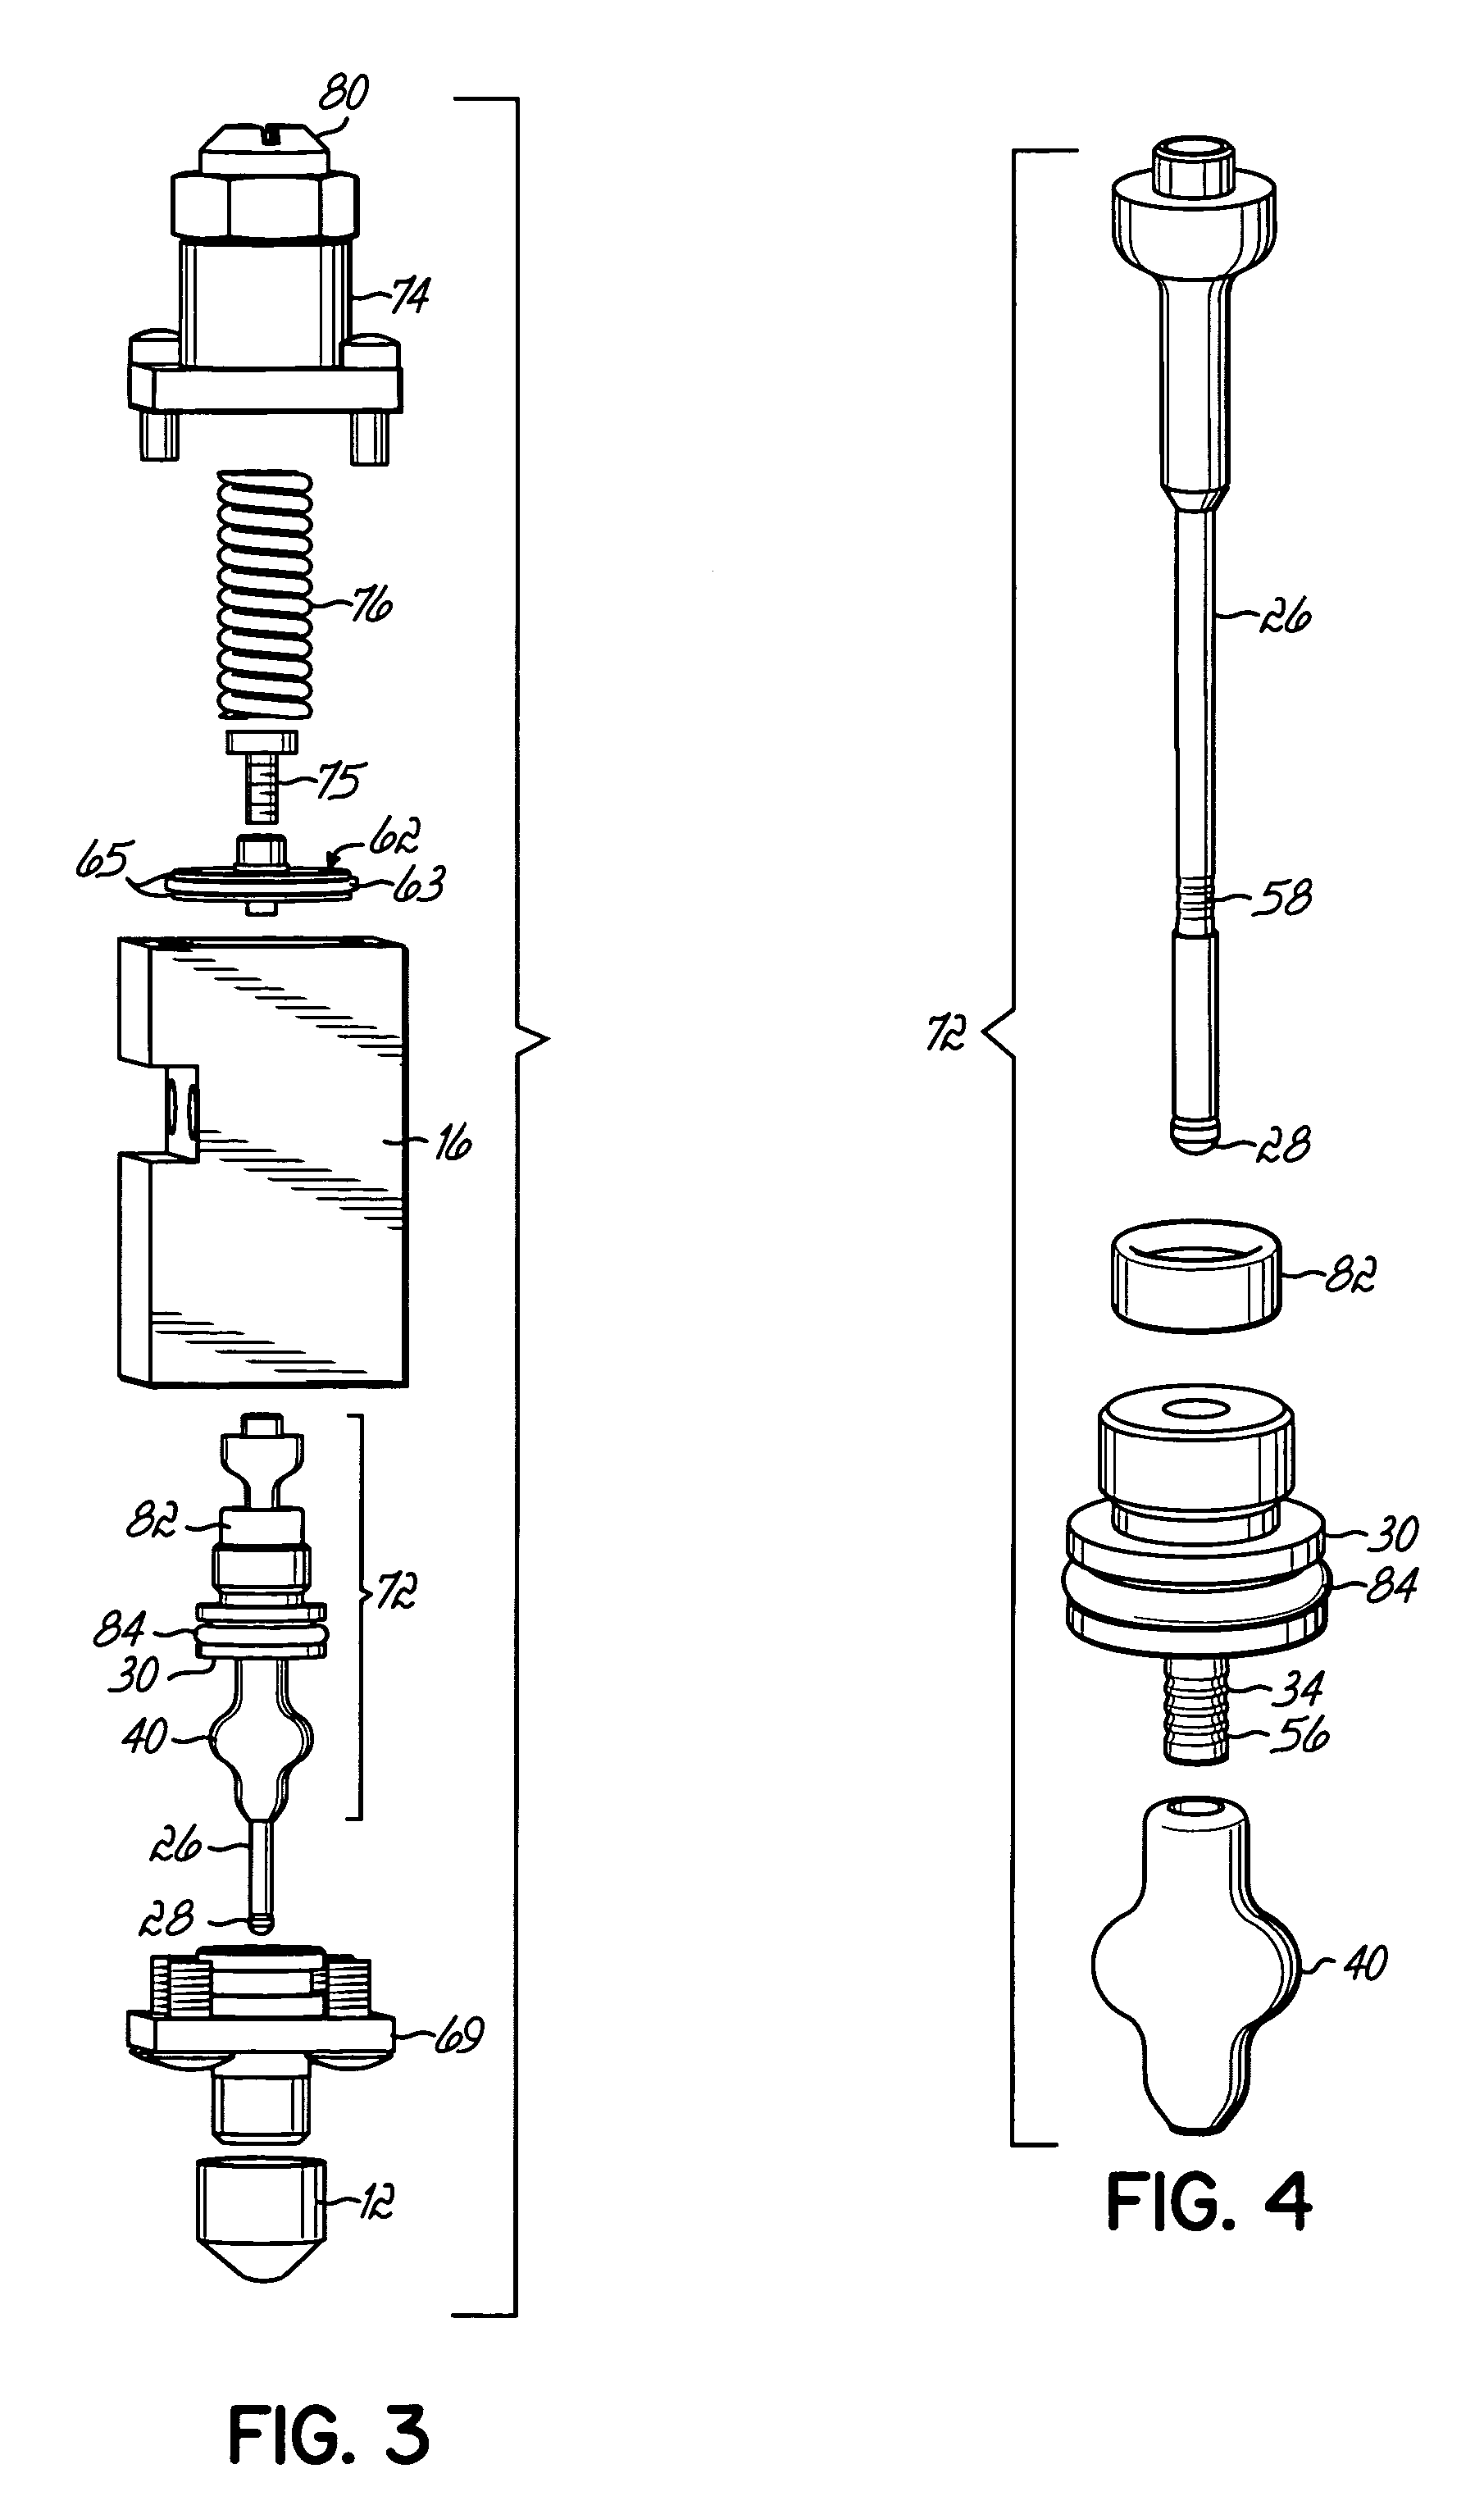 Method and system for dispensing liquid from a module having a flexible bellows seal